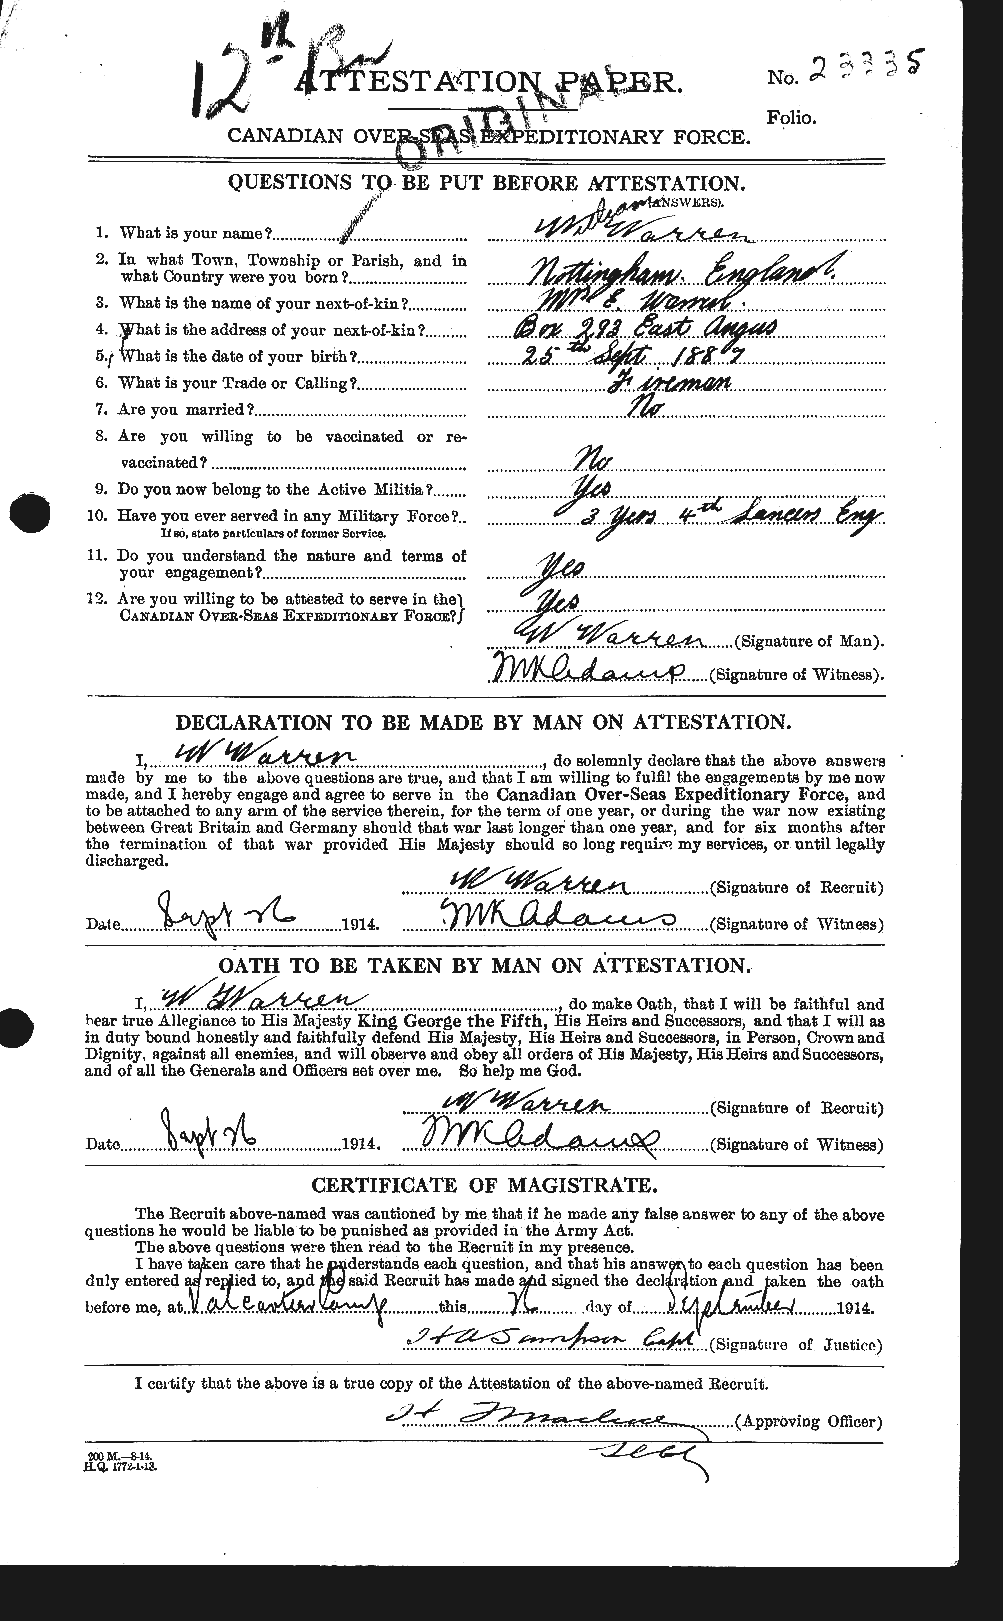 Personnel Records of the First World War - CEF 658669a